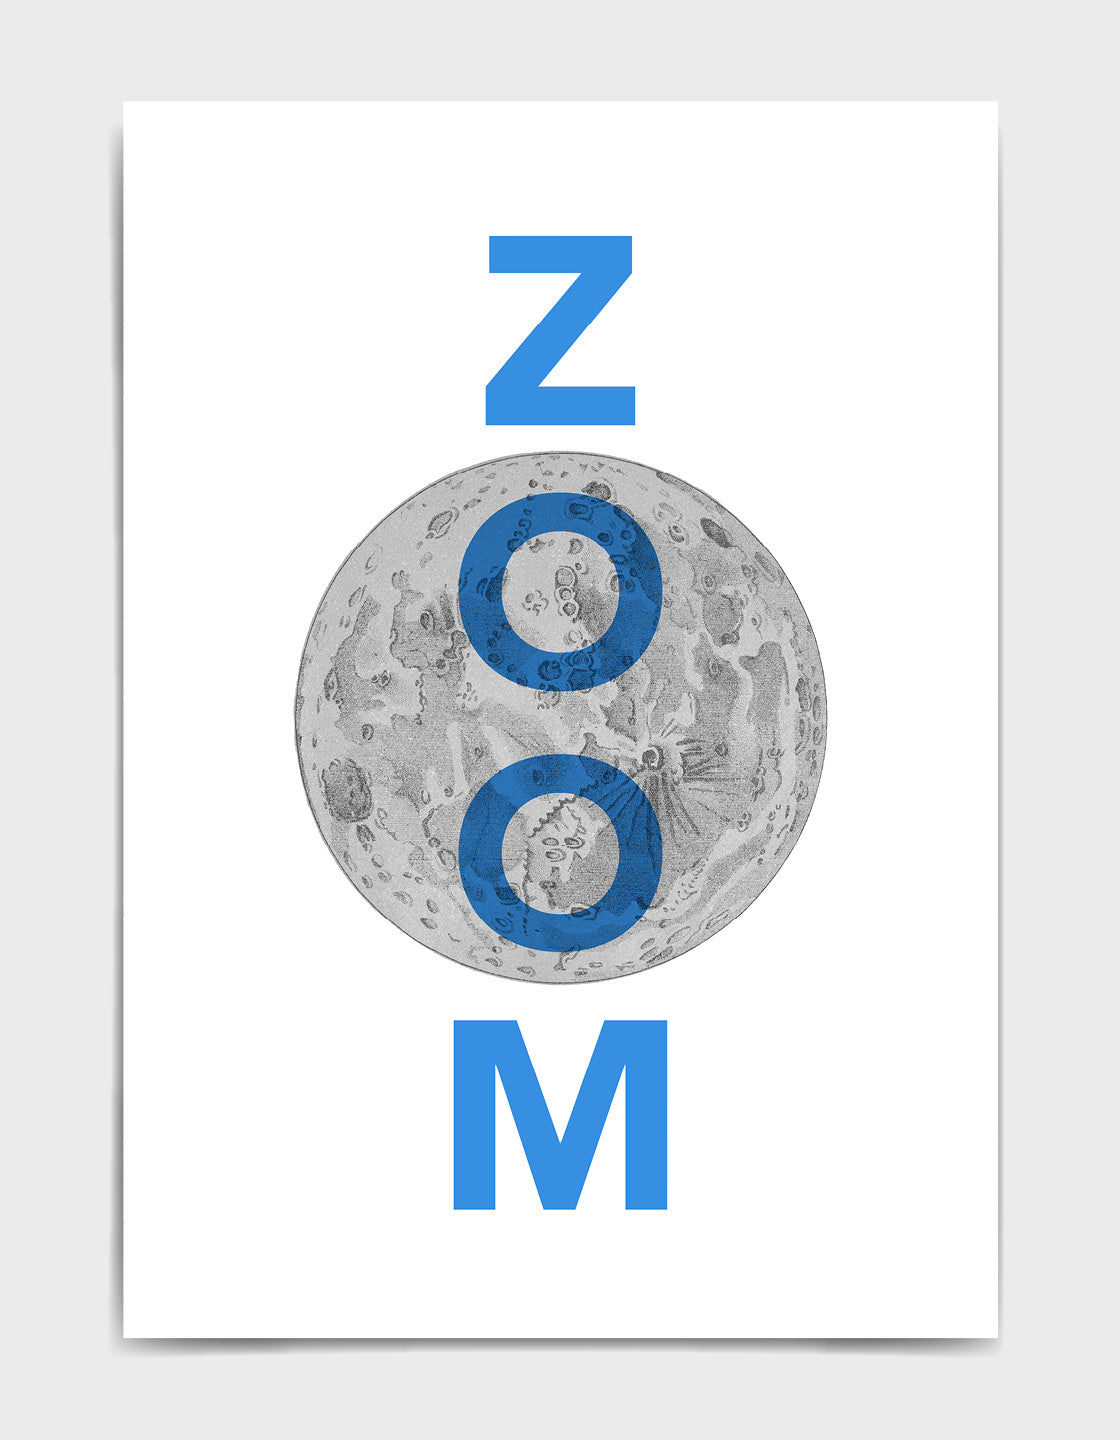 zoom to the moon typography art print. Features the word Zoom in blue text overlaid onto an archive line drawing of the moon